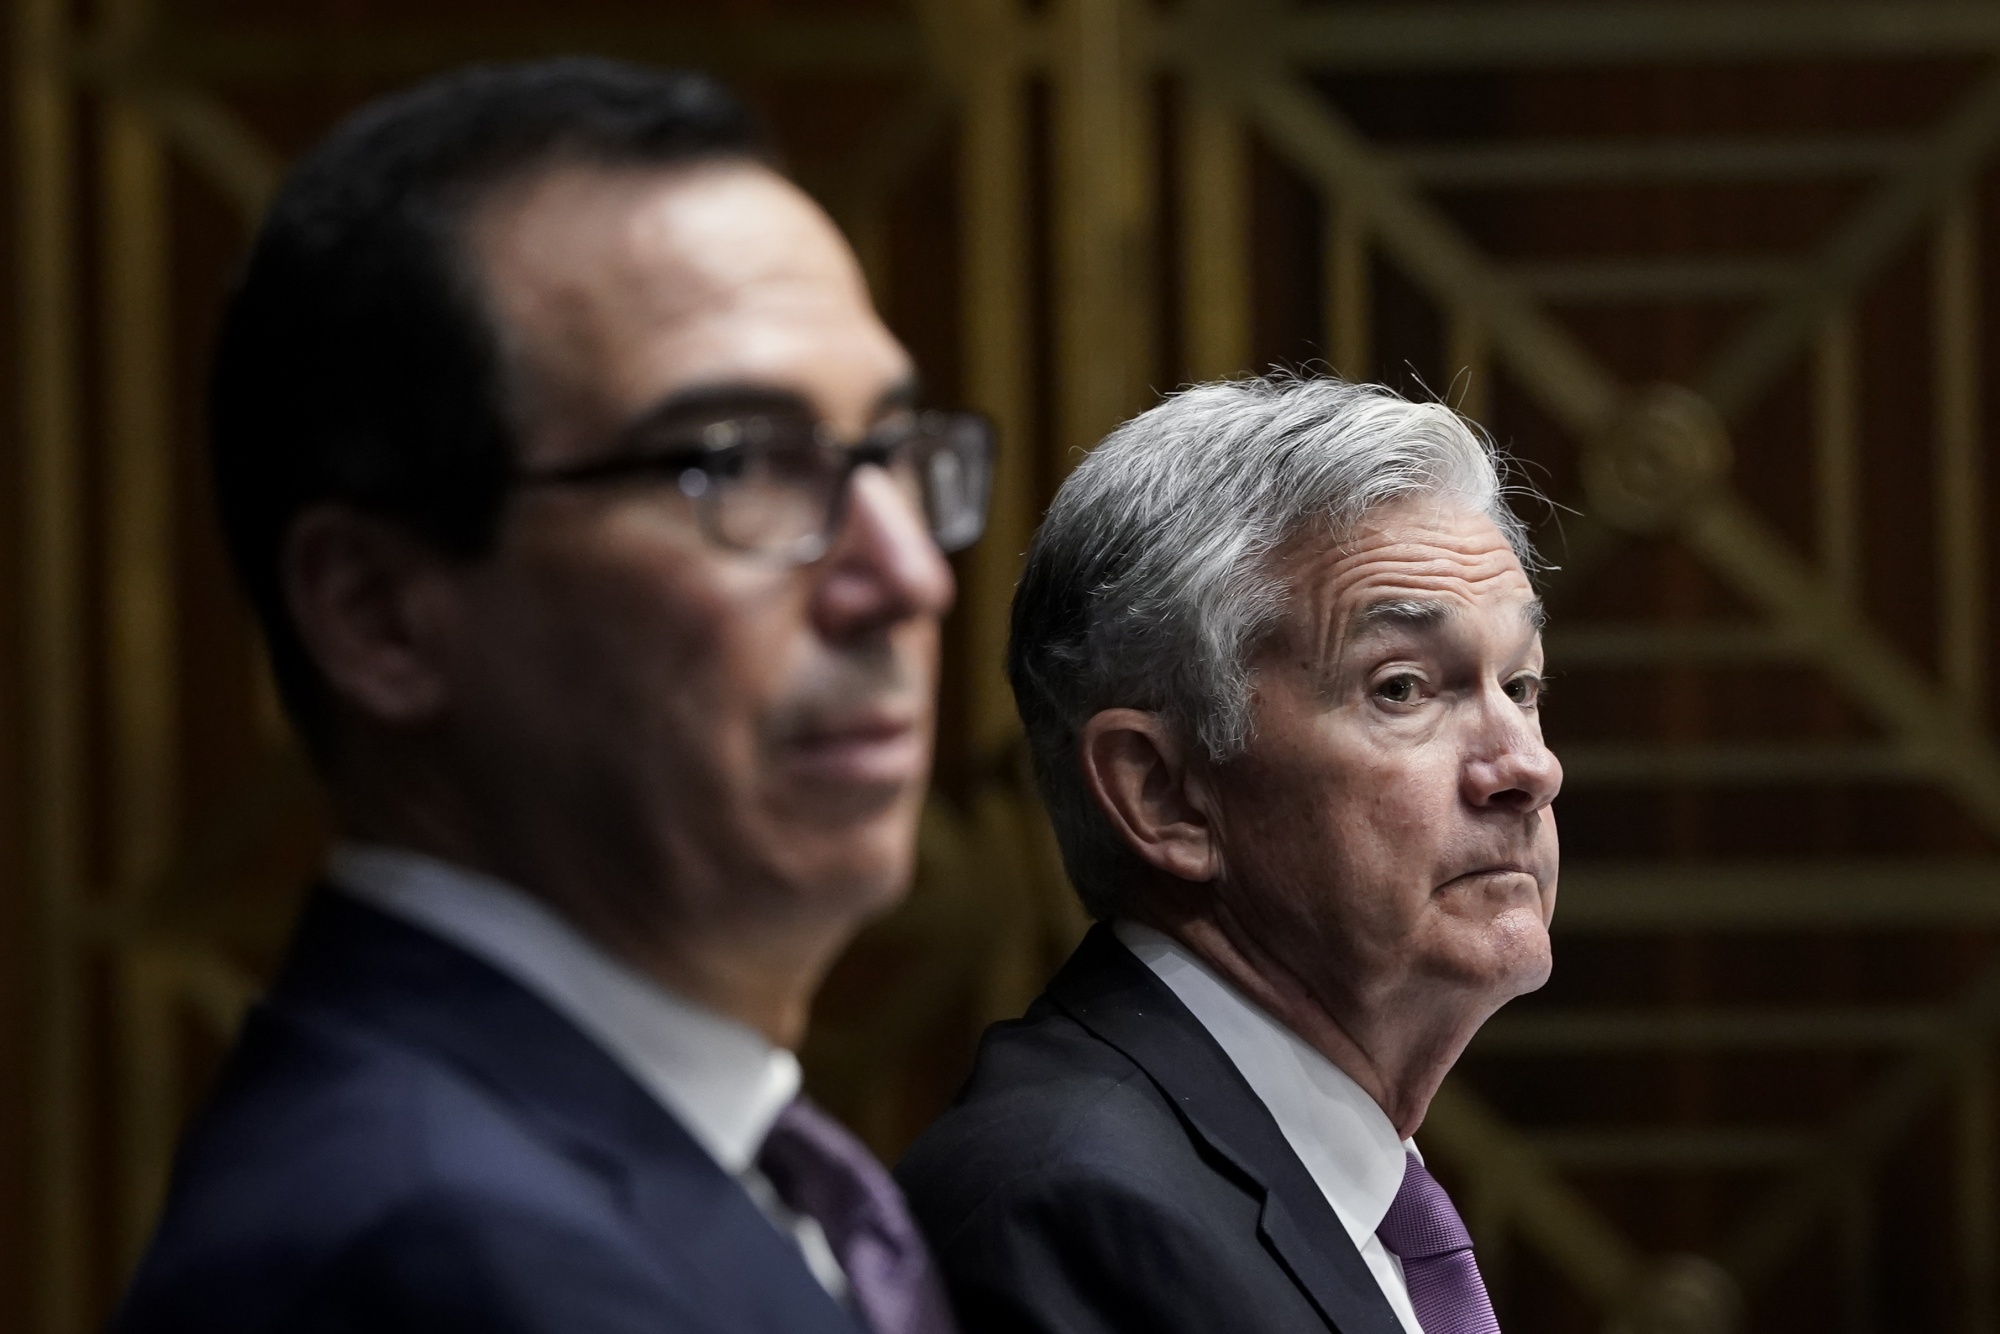 If Mnuchin and Powell let political crosscurrents impede their relief efforts, America loses.